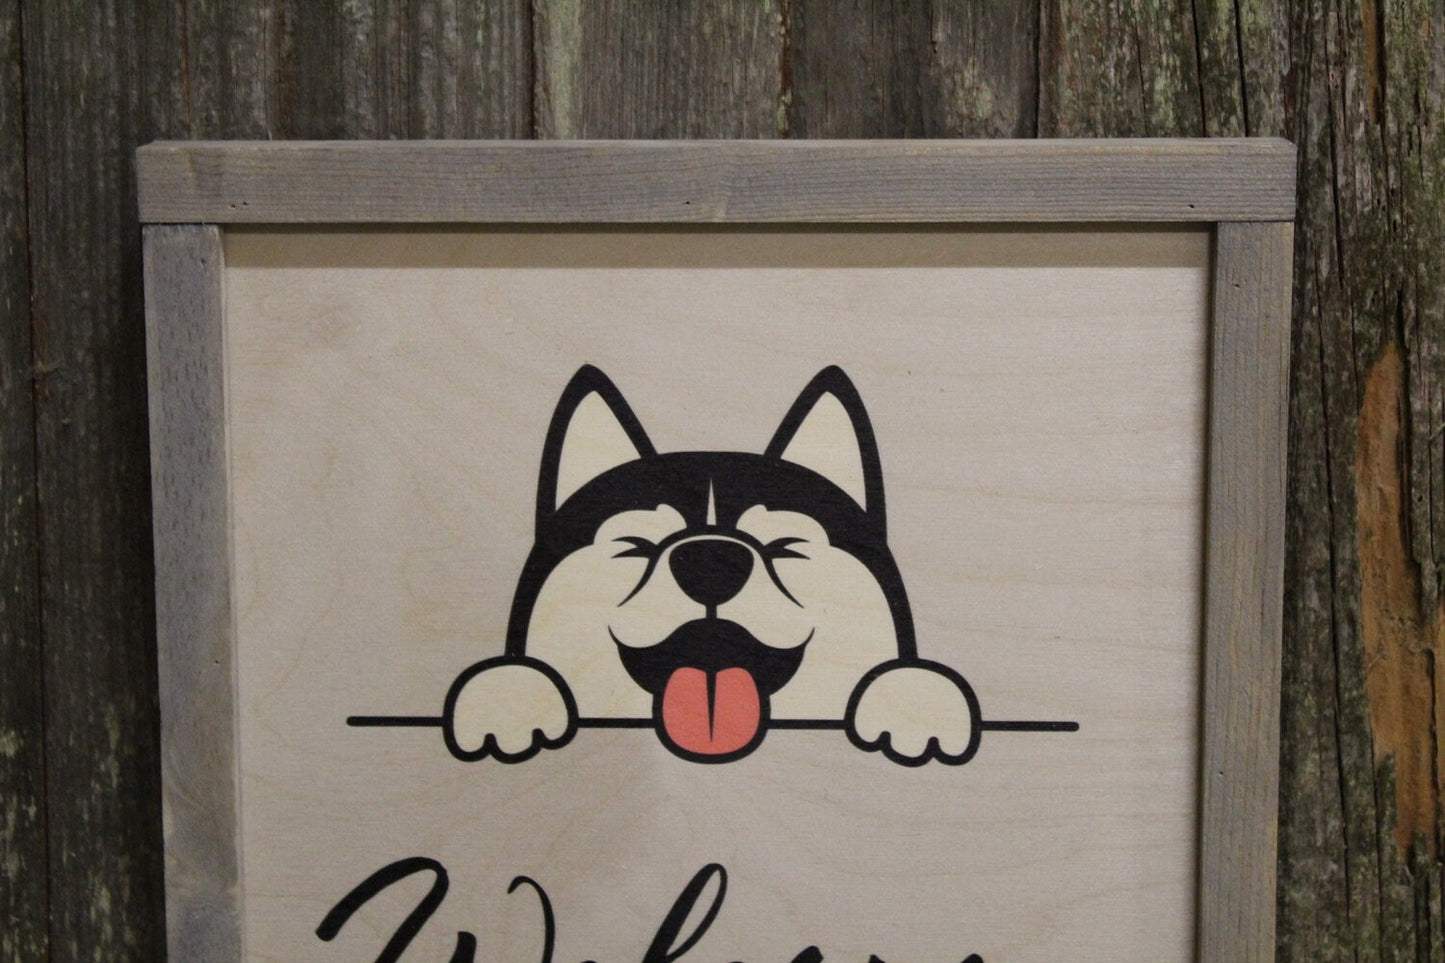 Welcome Siberian Husky Sign Wood Dog Puppy Cute Tongue Framed Print Hi Hello Cartoon Pup Primitive Rustic Picture Wall Art Decoration